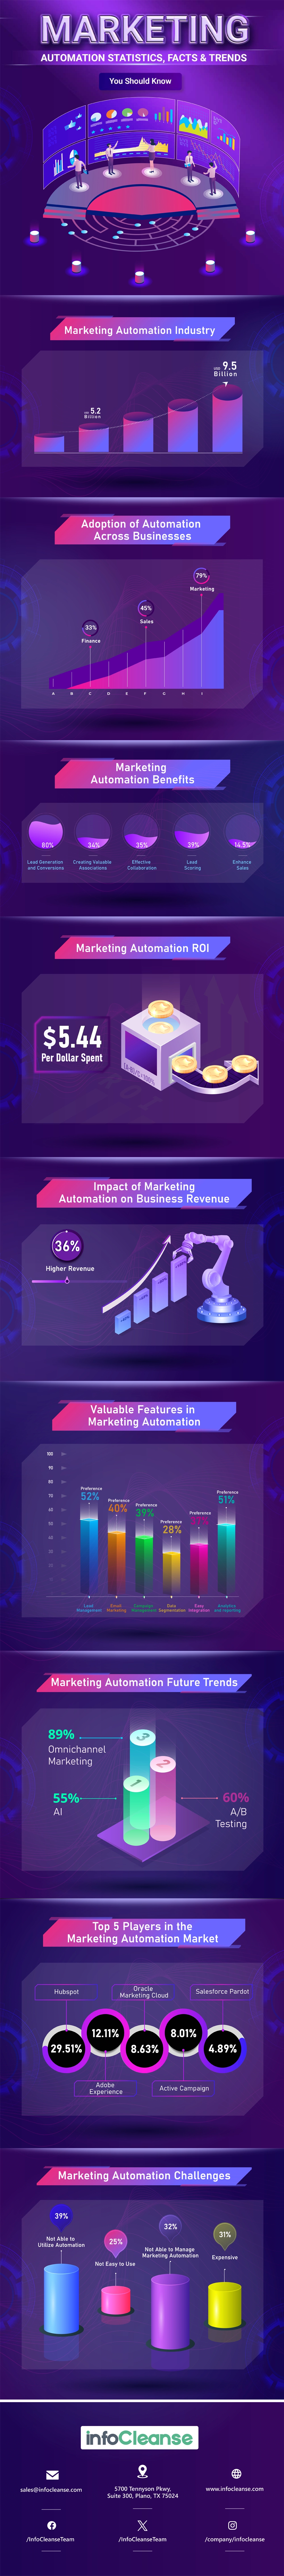 Marketing Automation Statistics, Facts & Trends You Should Know Infographic